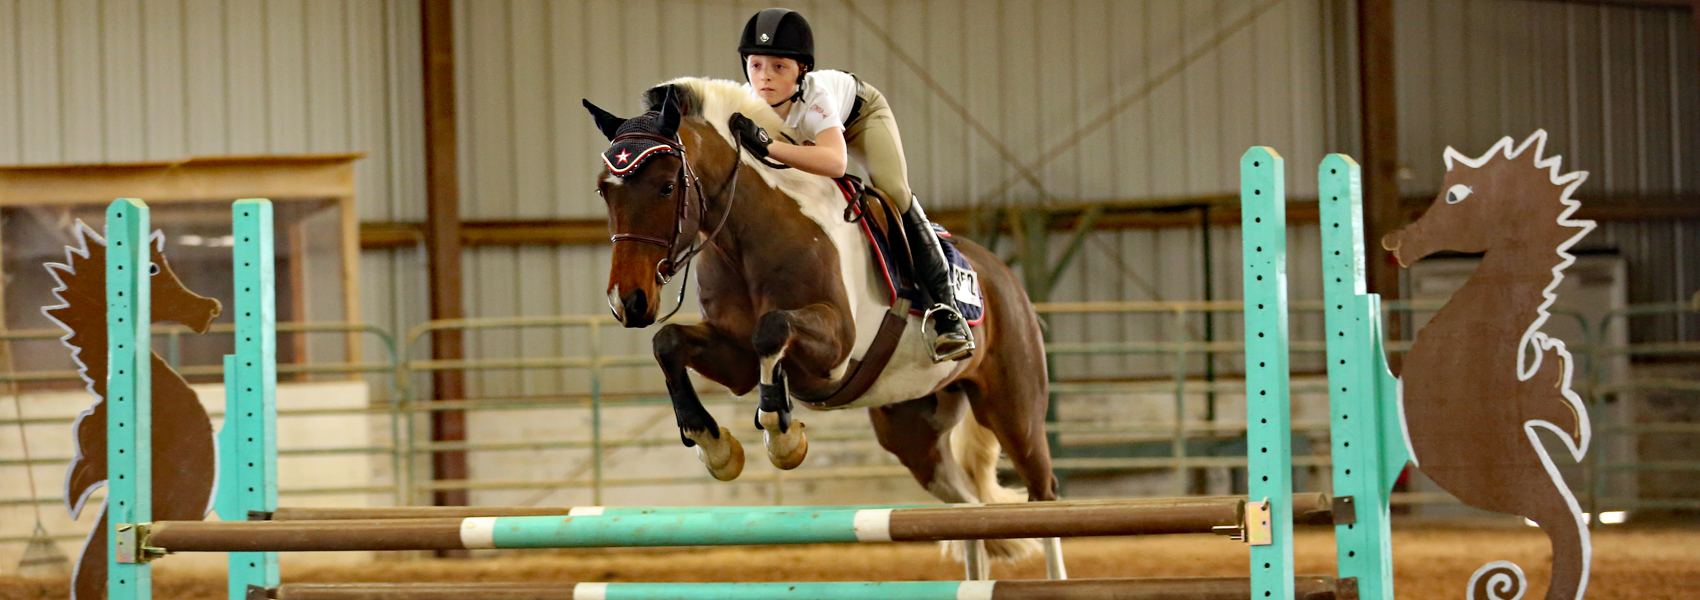 Rider and horse jump an obstacle in the riding arena